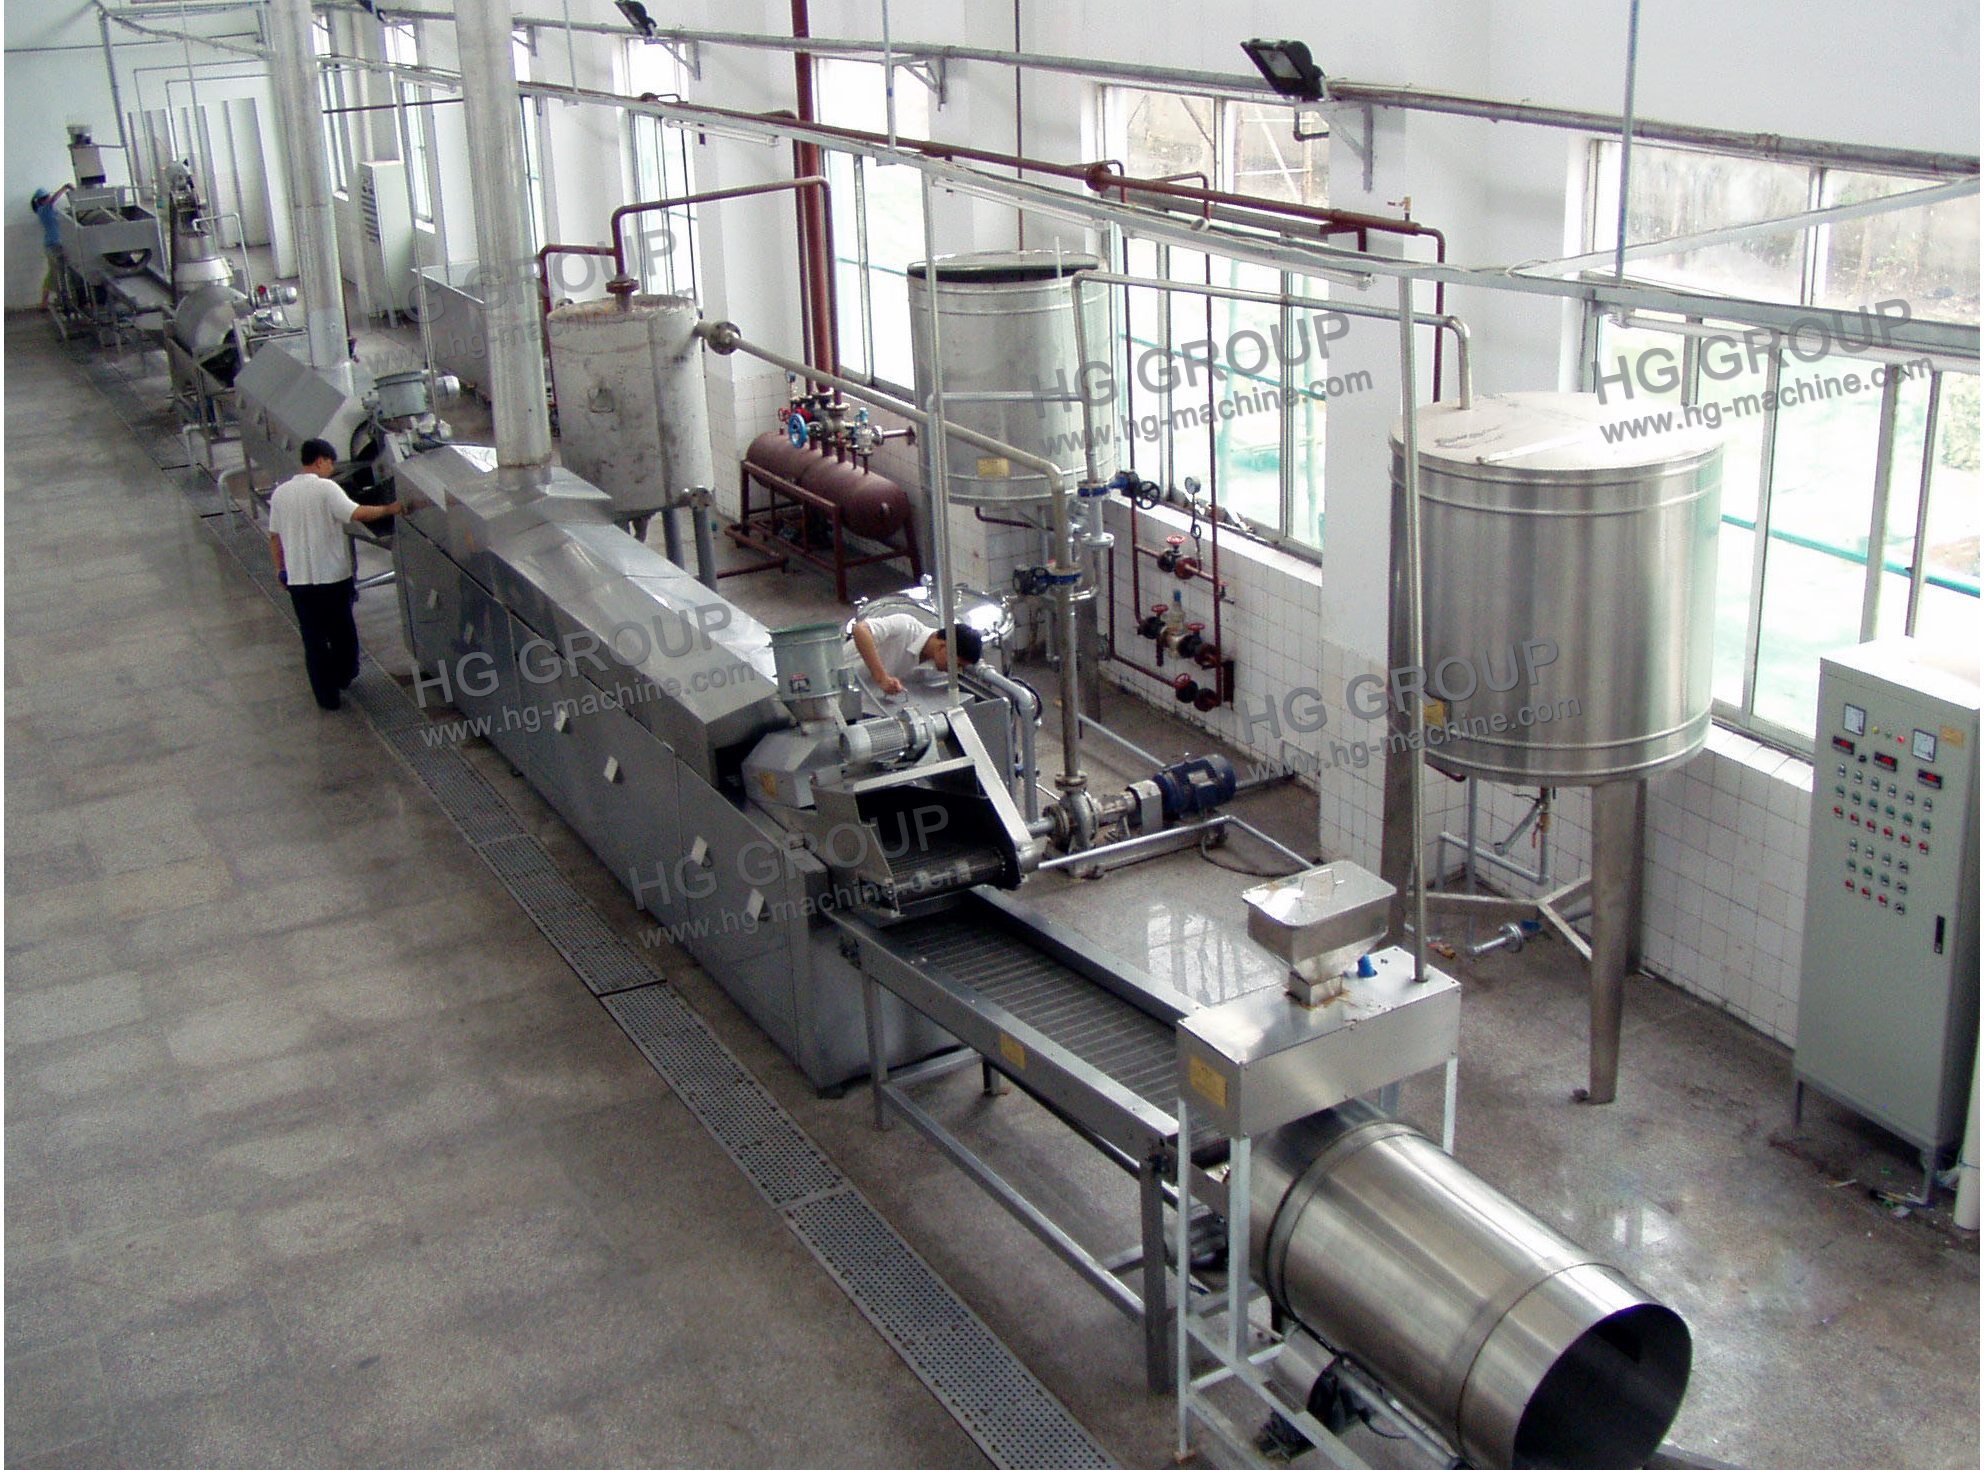 What are some safety precautions to follow when operating a food machine